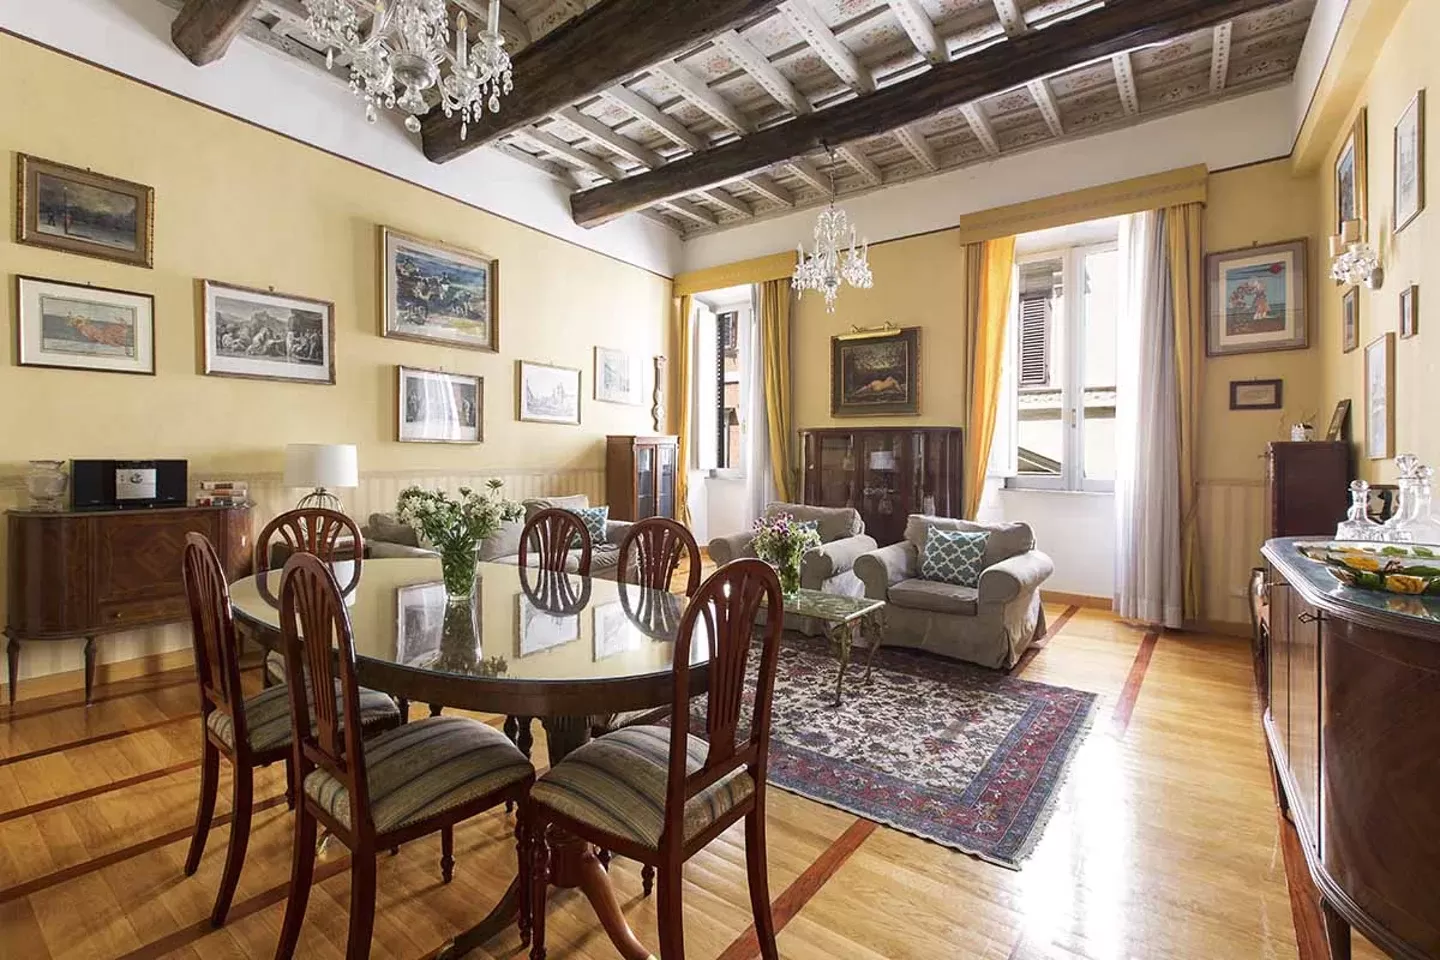 Best Hotels in Rome near Spanish Steps - Lounge room in Eternal Flame apartment